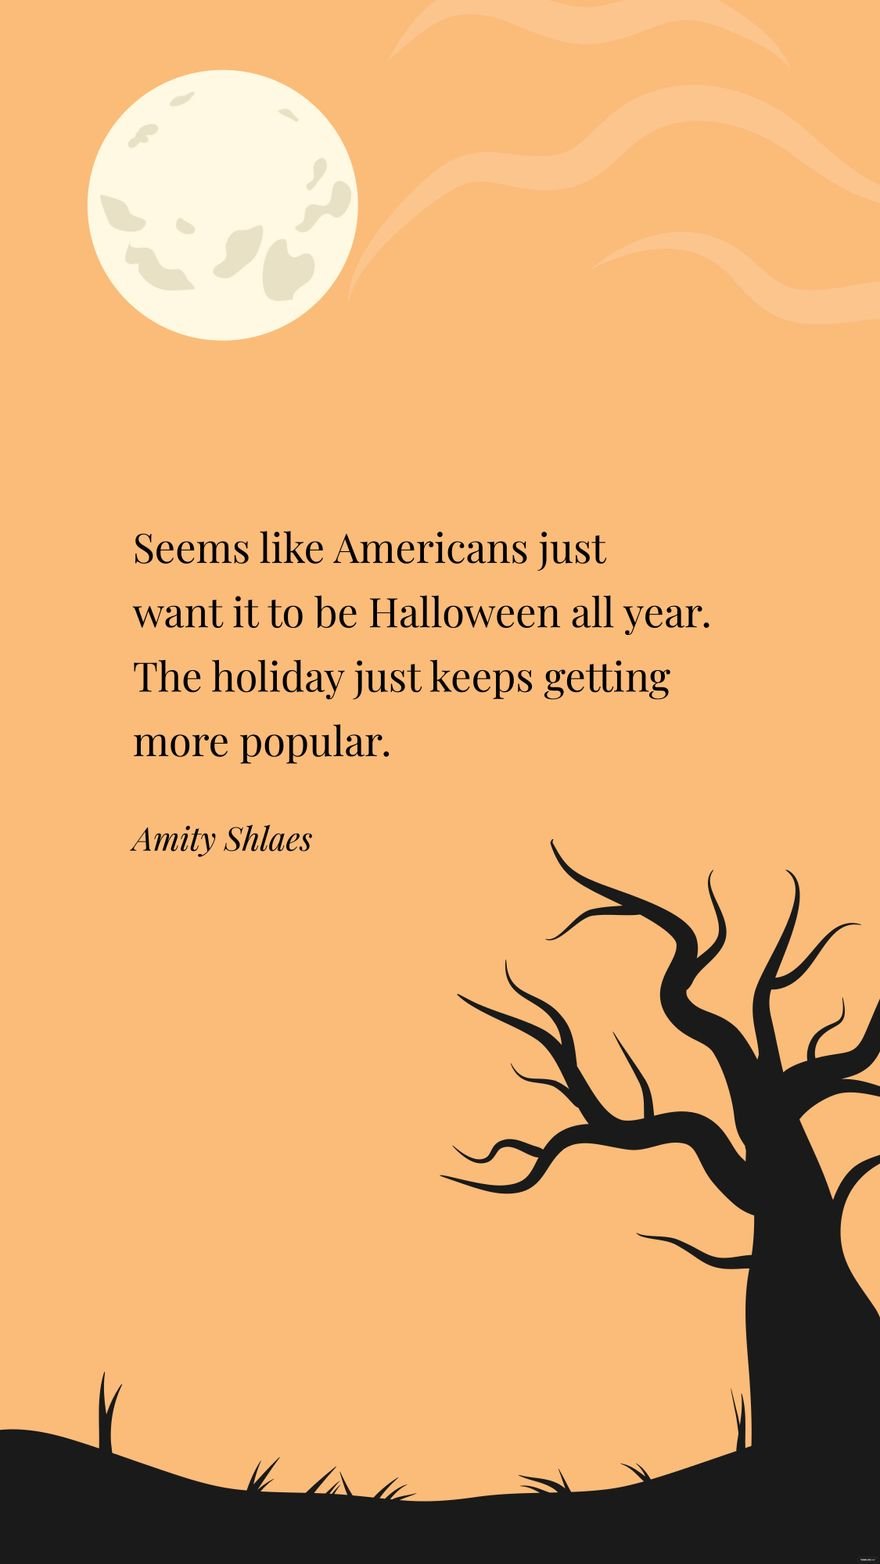 Amity Shlaes- Seems like Americans just want it to be Halloween all year. The holiday just keeps getting more popular. in JPG